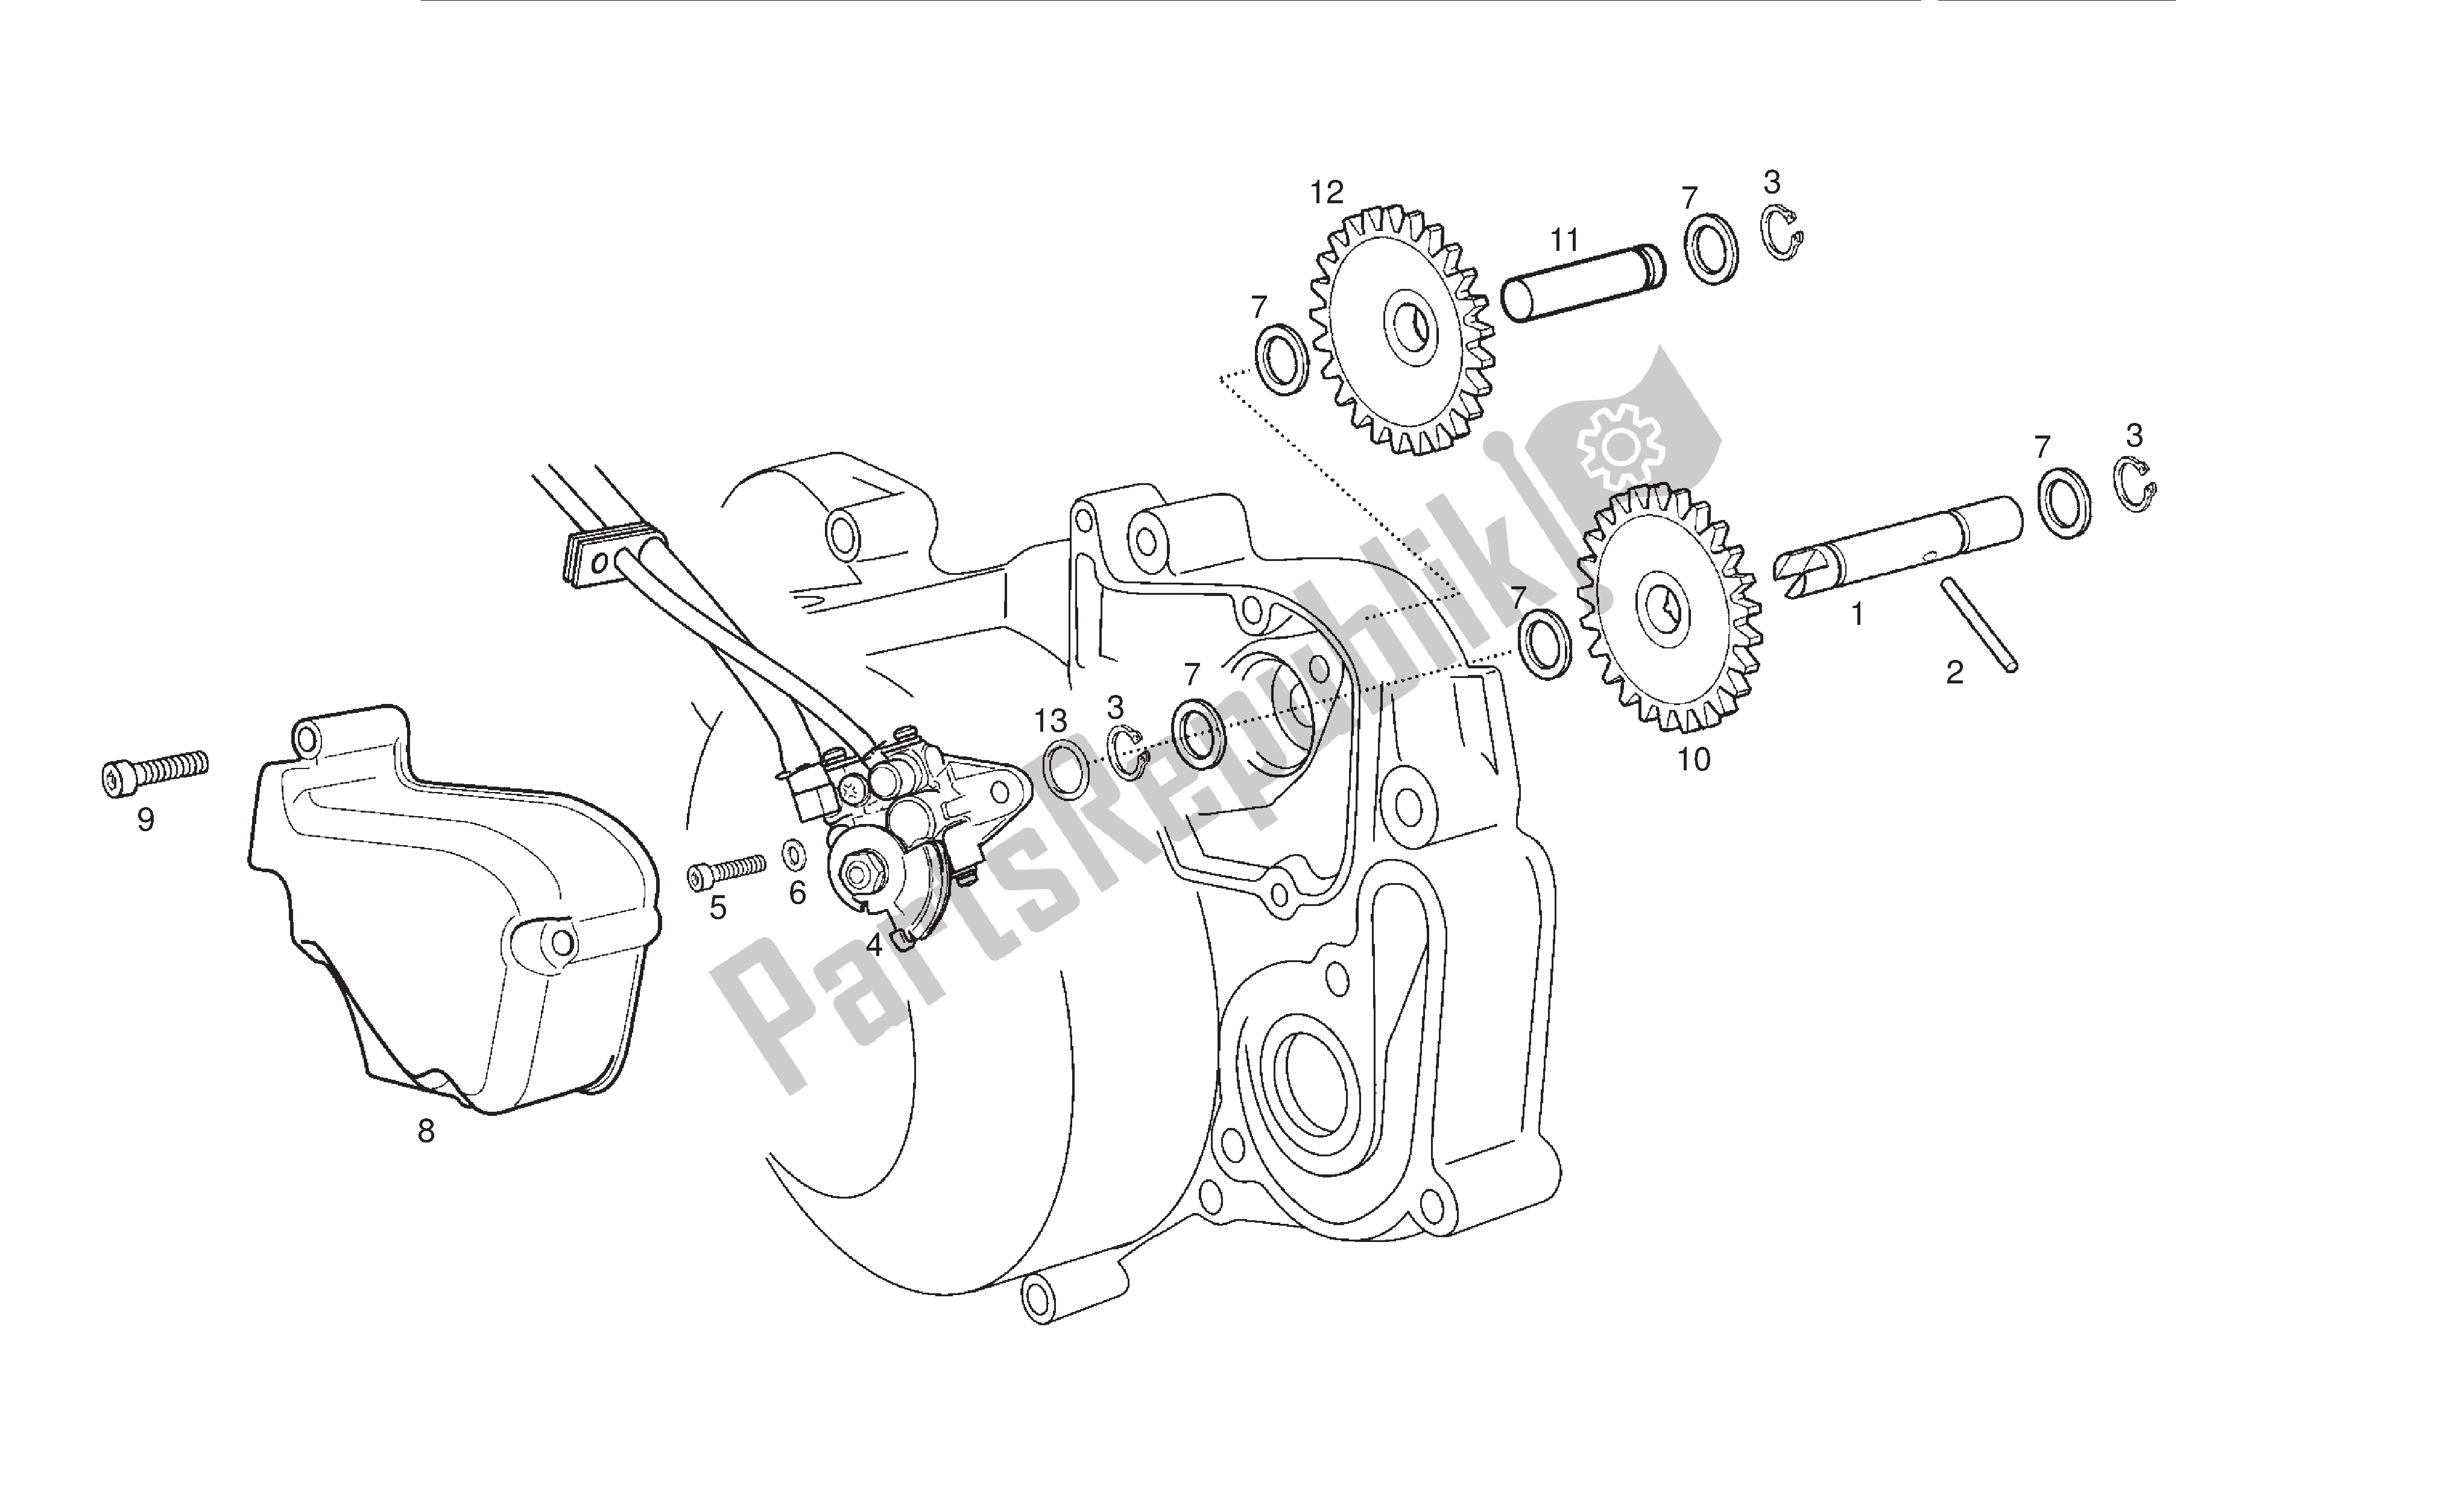 All parts for the Oil Pump of the Derbi Senda DRD SM 50 2005 - 2008